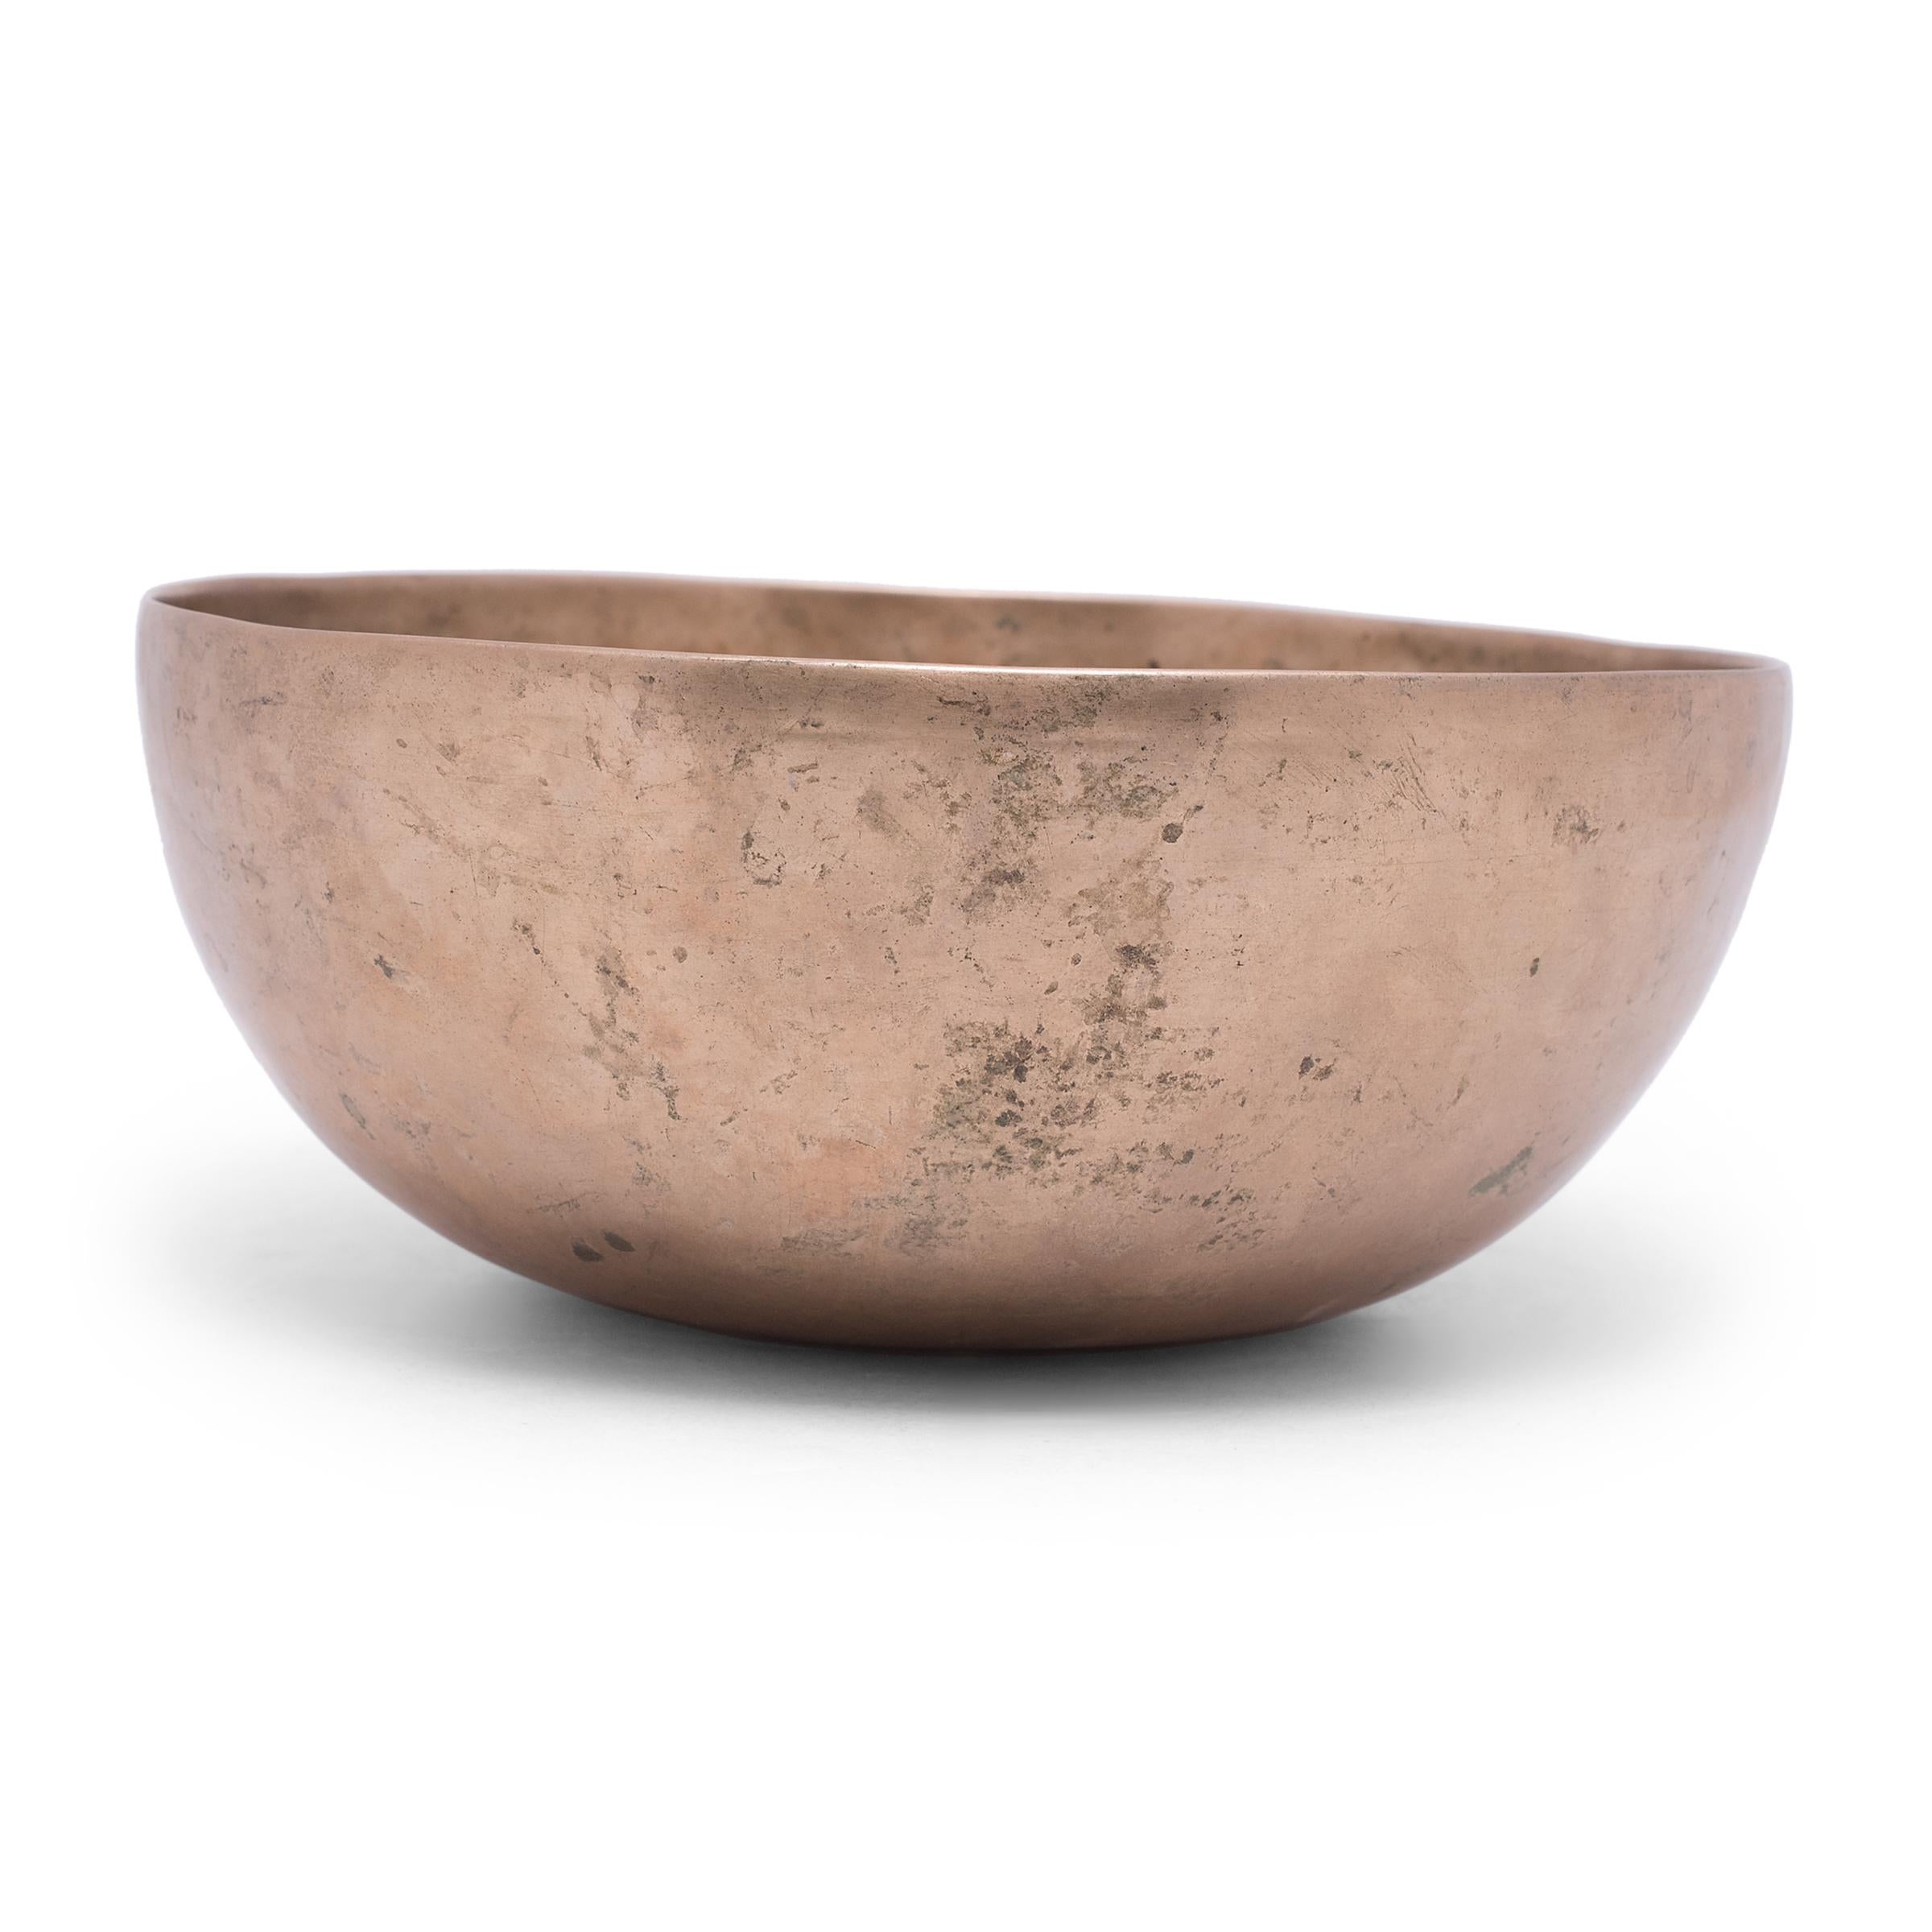 Dated to the mid-19th century, this singing bowl was traditionally used for meditation. It is hand-formed from eight mixed metals including copper, tin, iron, lead, zinc, gold, silver and mercury. The eight metal alloy together produces a deep, rich